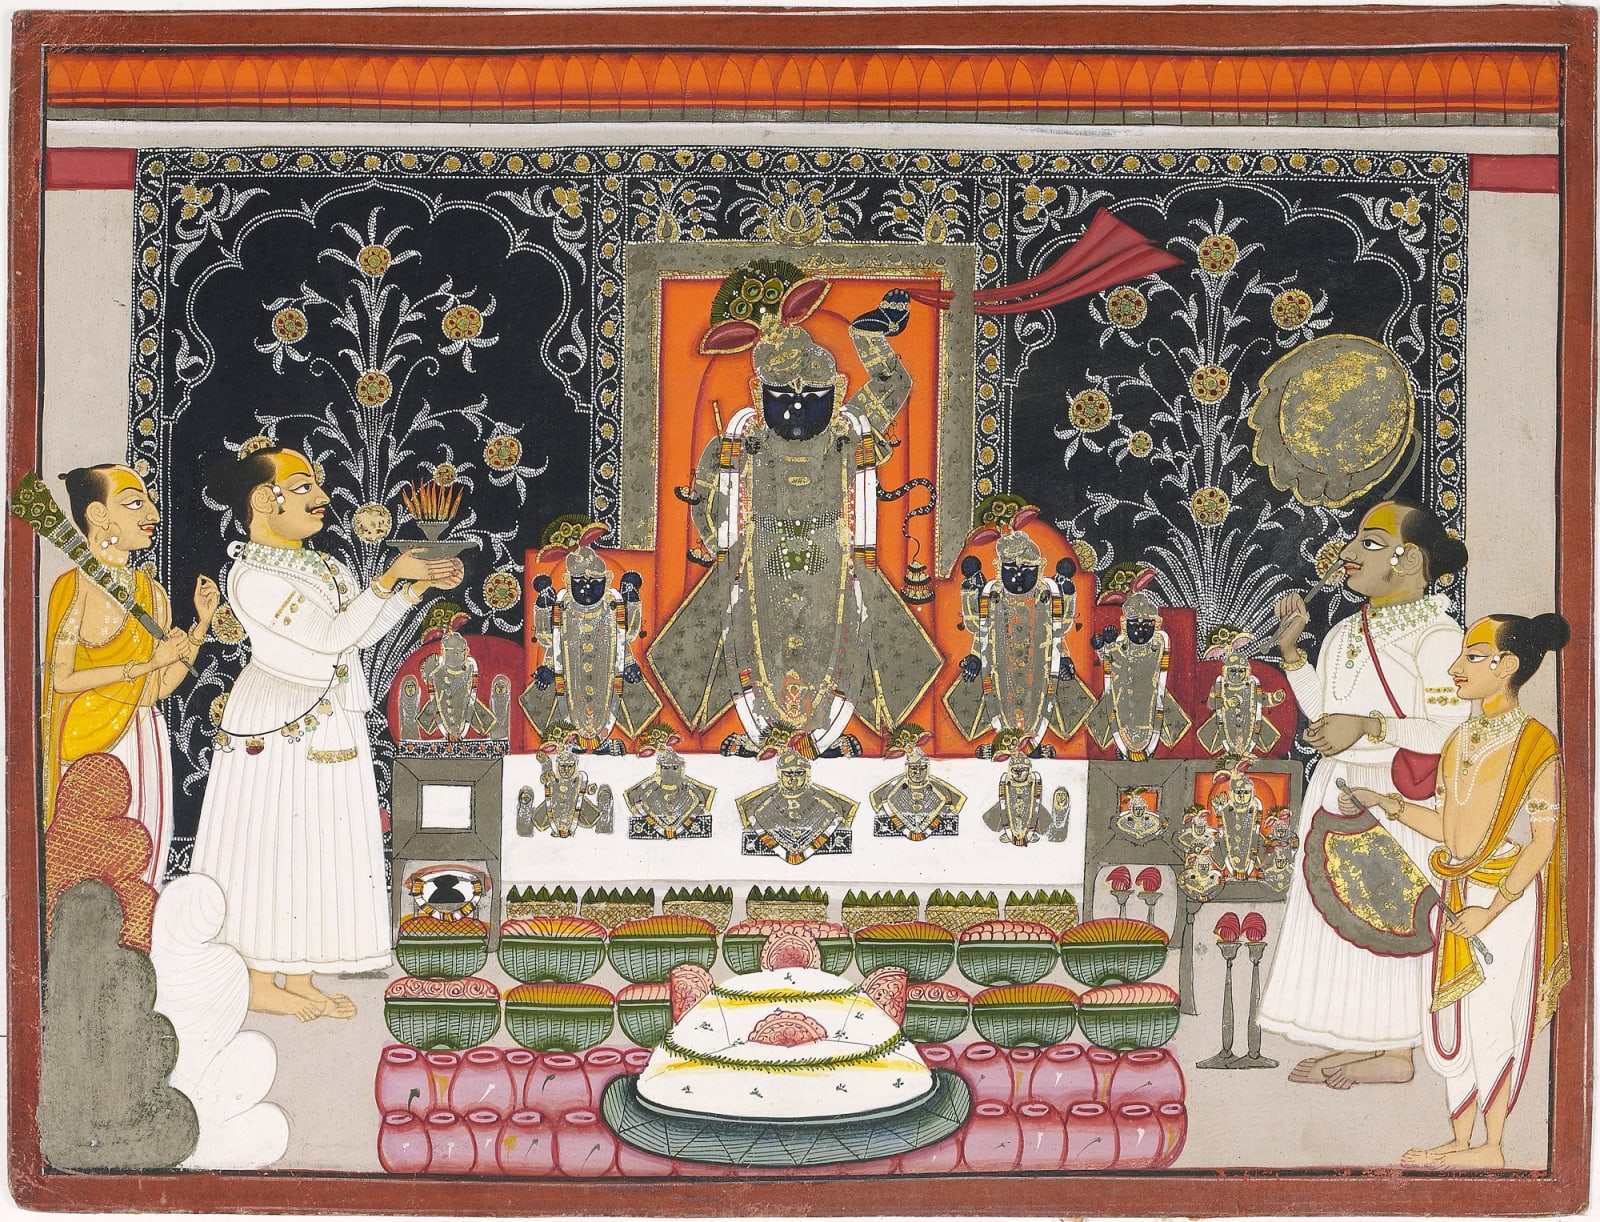 The Worship of Shri Nathi during the festival of Annakut (The mountain of food), By a Nathadwara artist, c. 1850